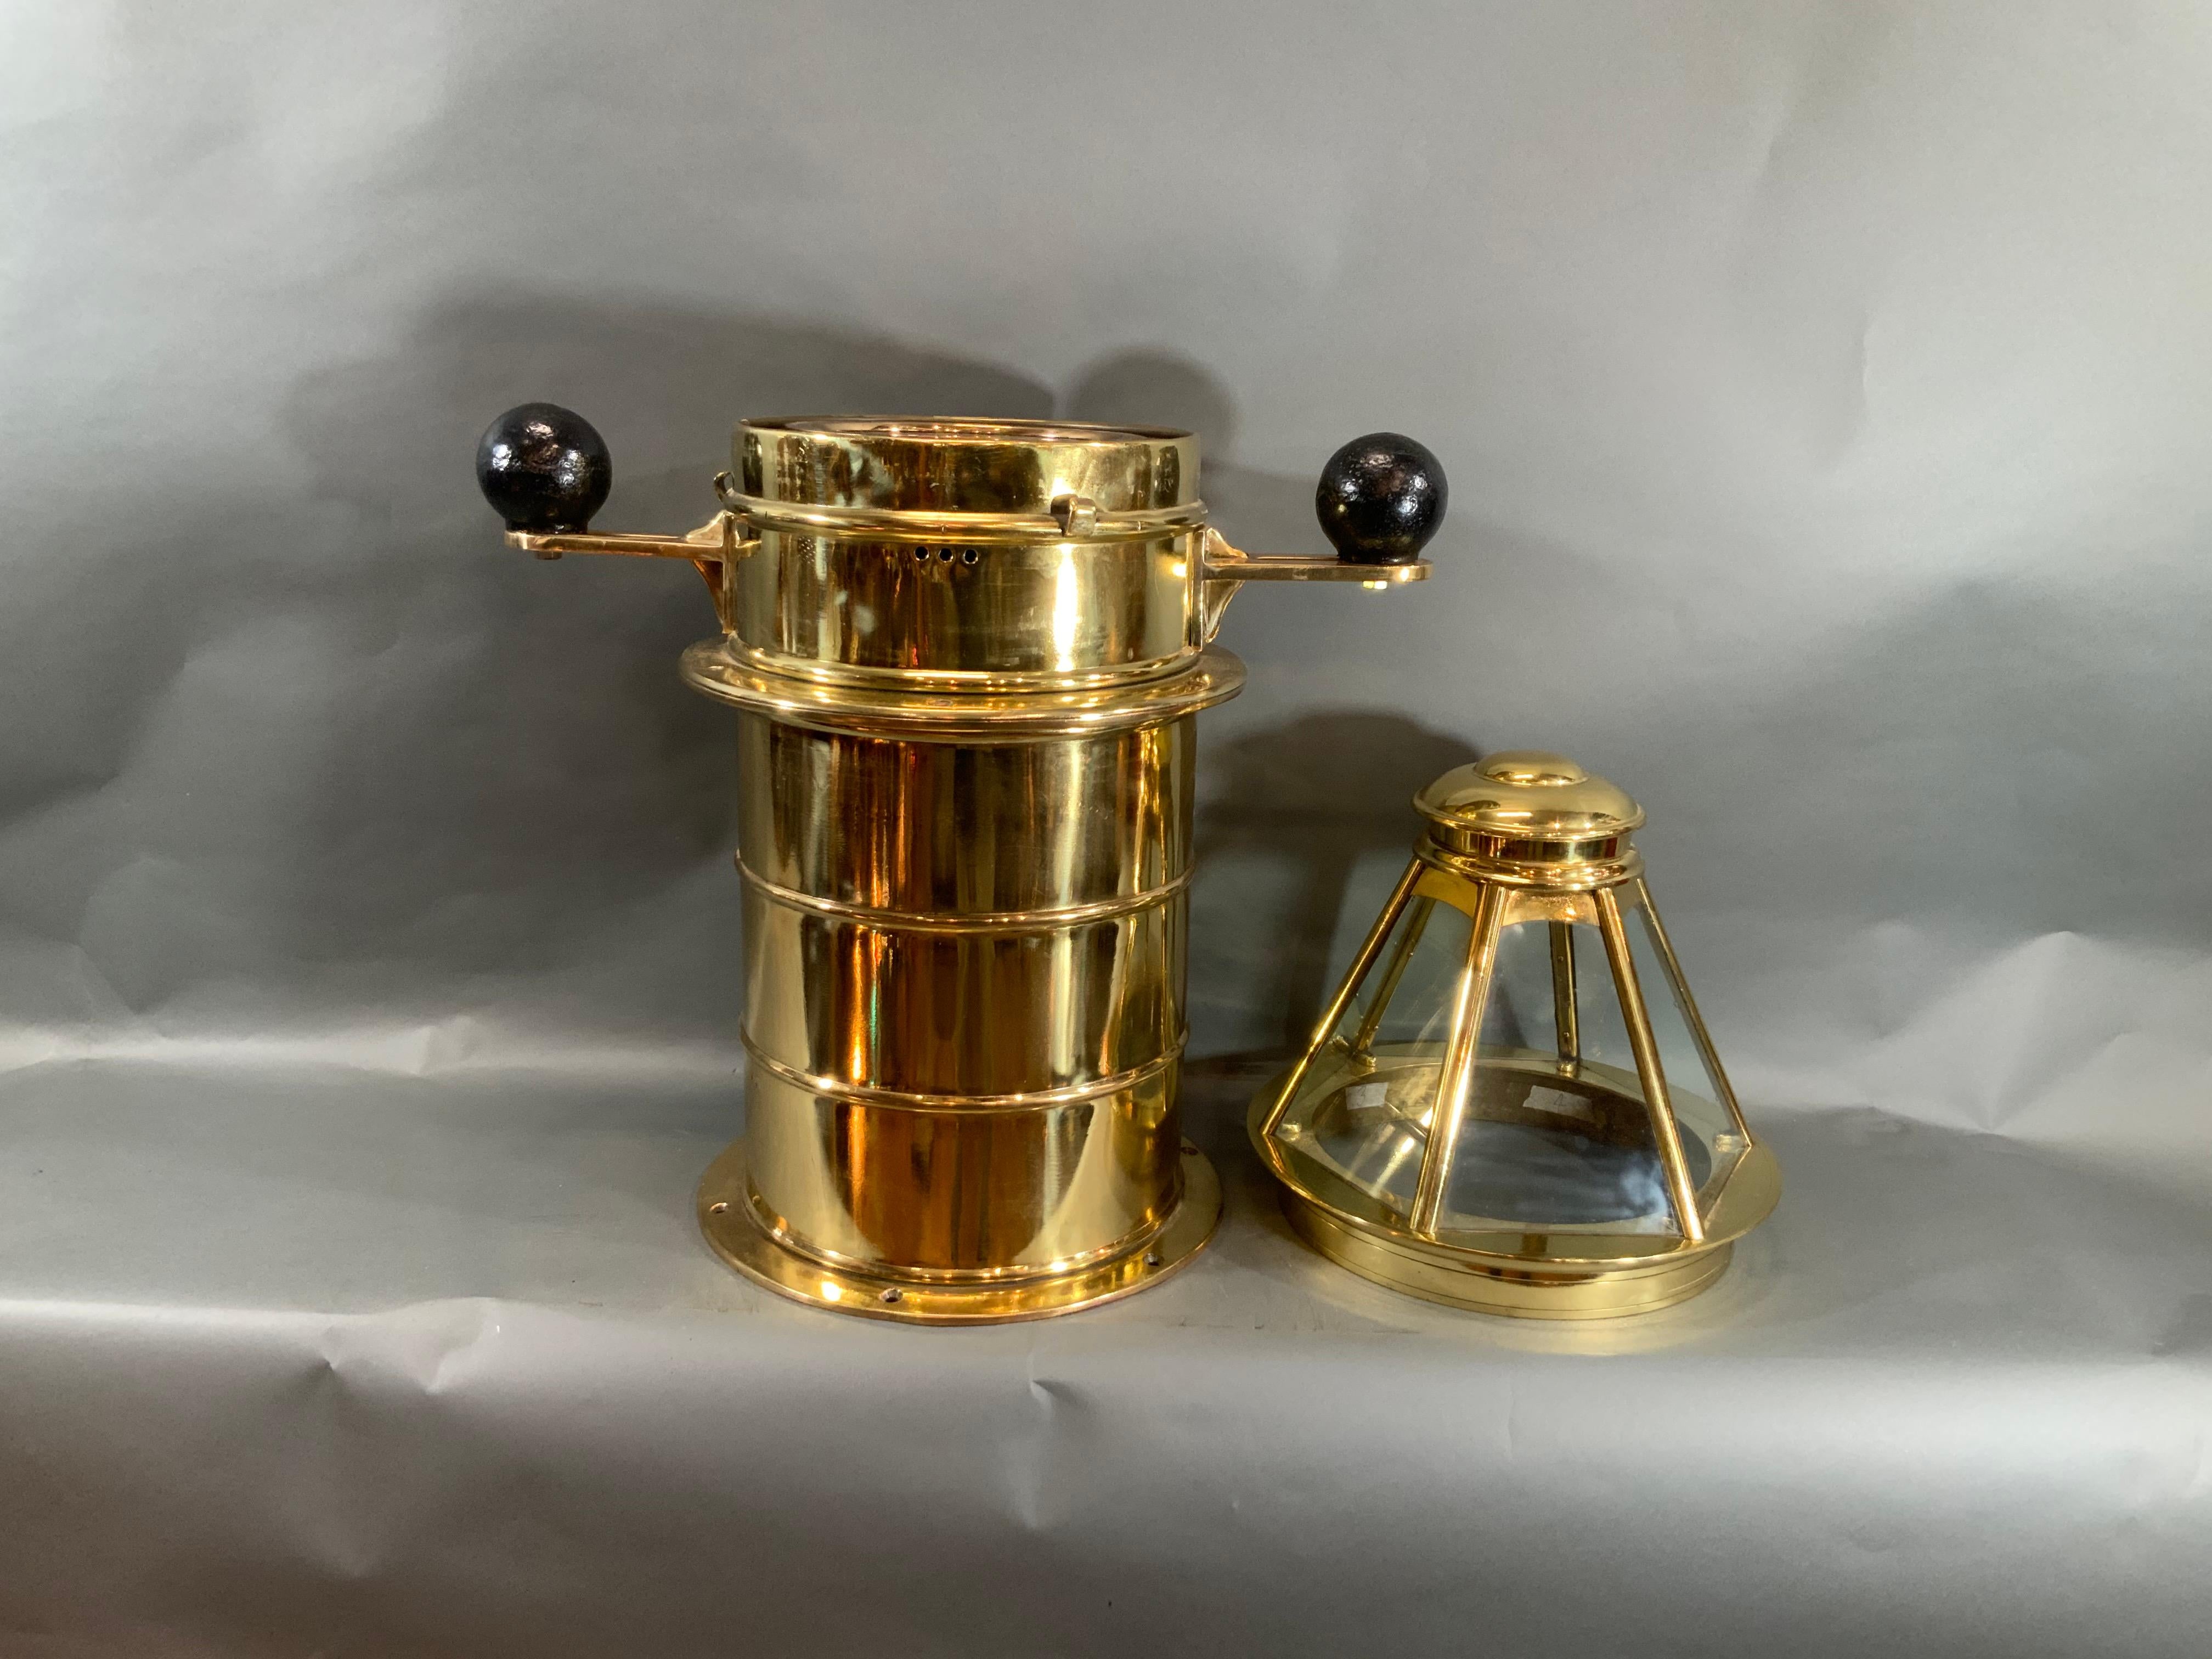 Outstanding Solid Brass Yacht Binnacle circa 1920 For Sale 3